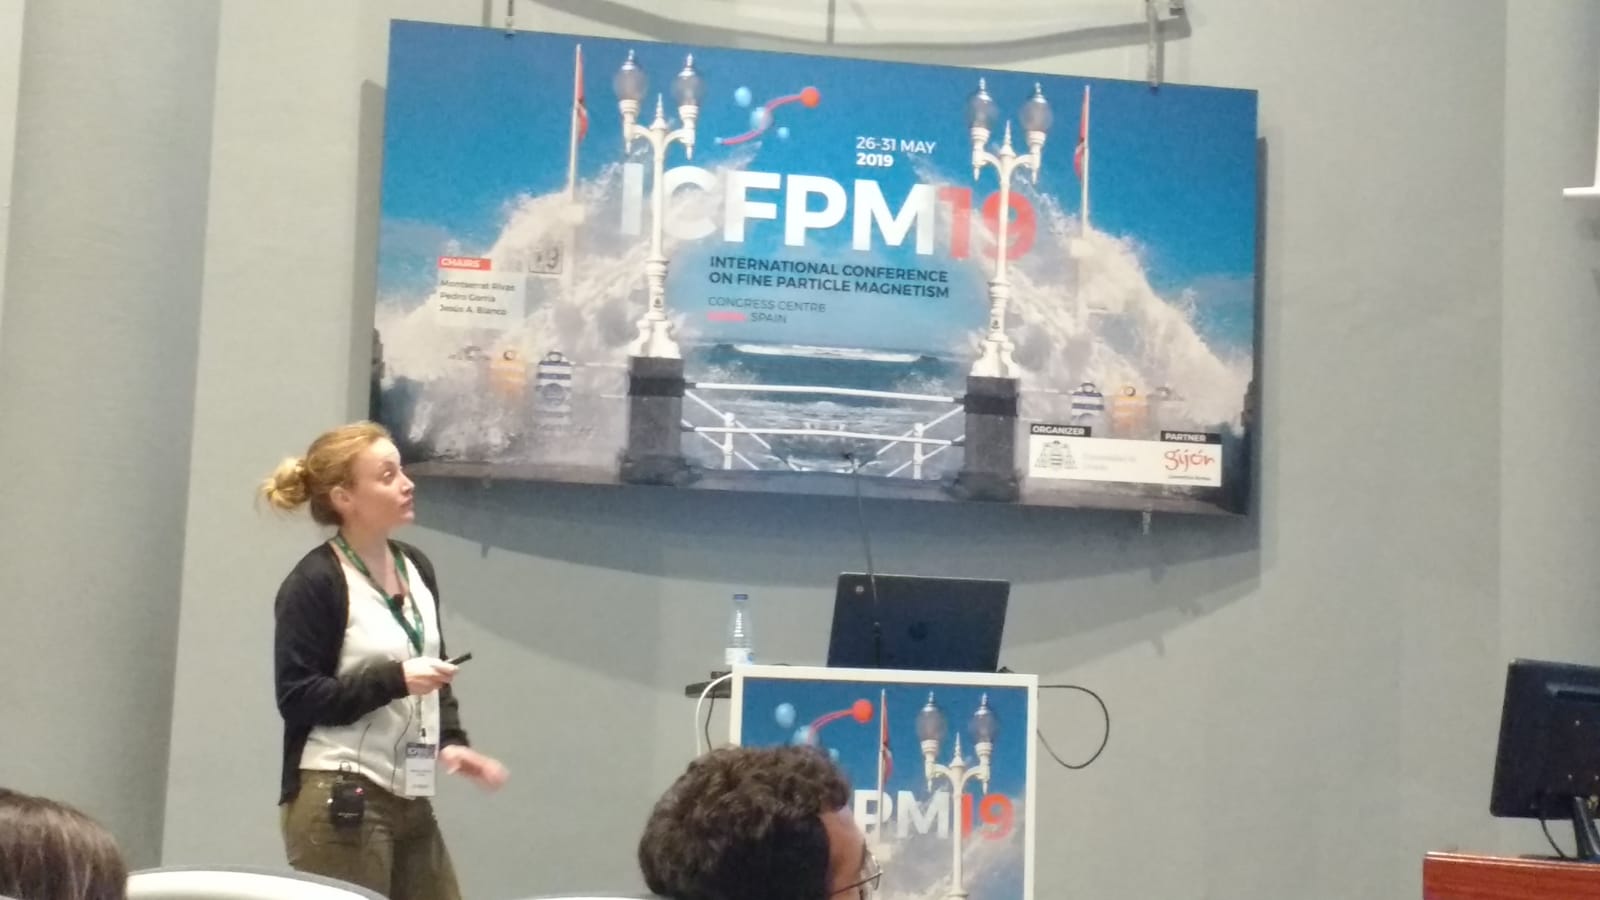 BCMaterials at The International Conference on Fine Particle Magnetism